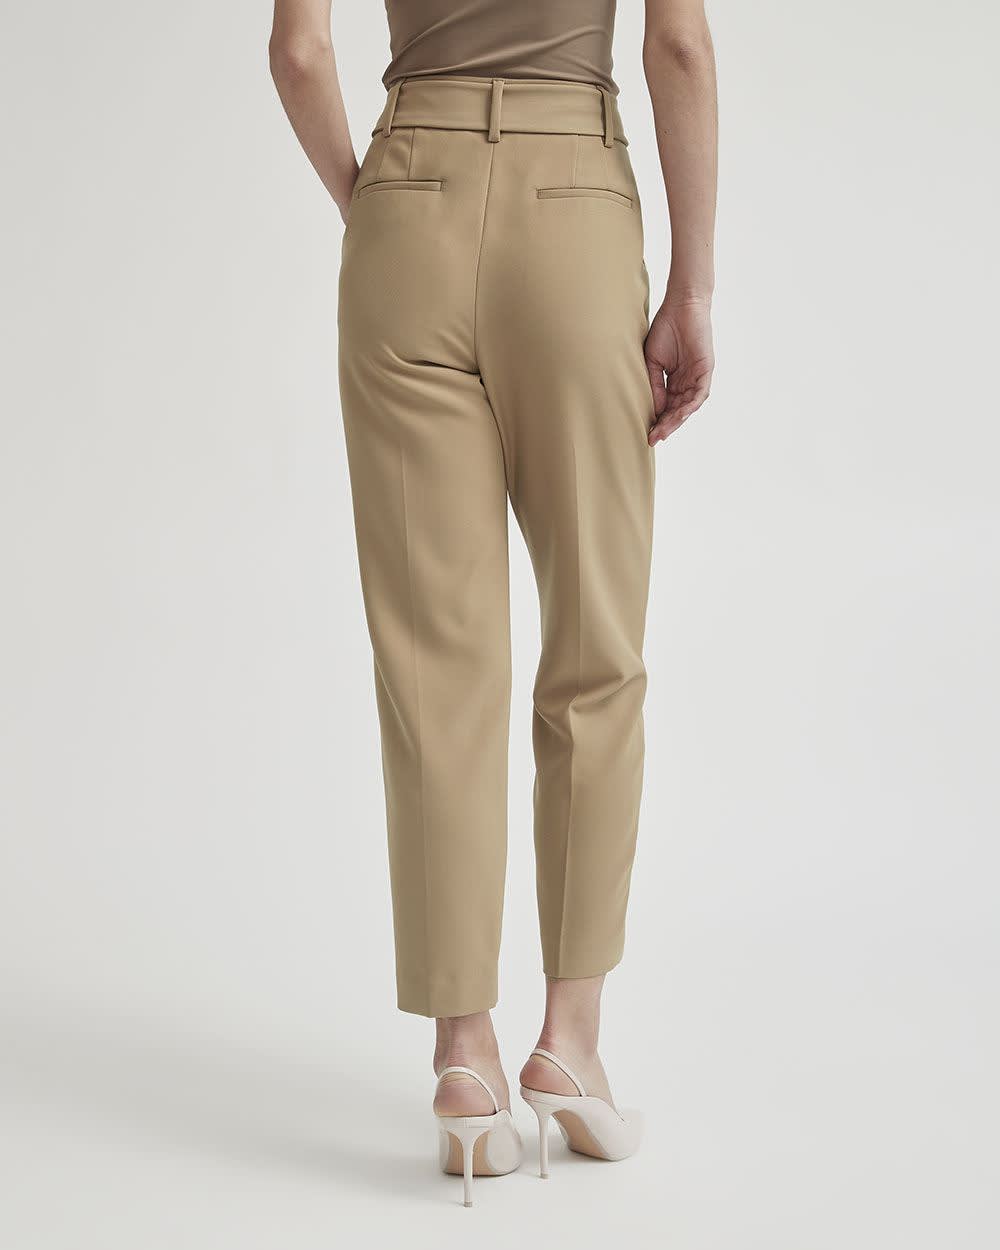 Buy Beige Ankle Length Pant Rayon for Best Price, Reviews, Free